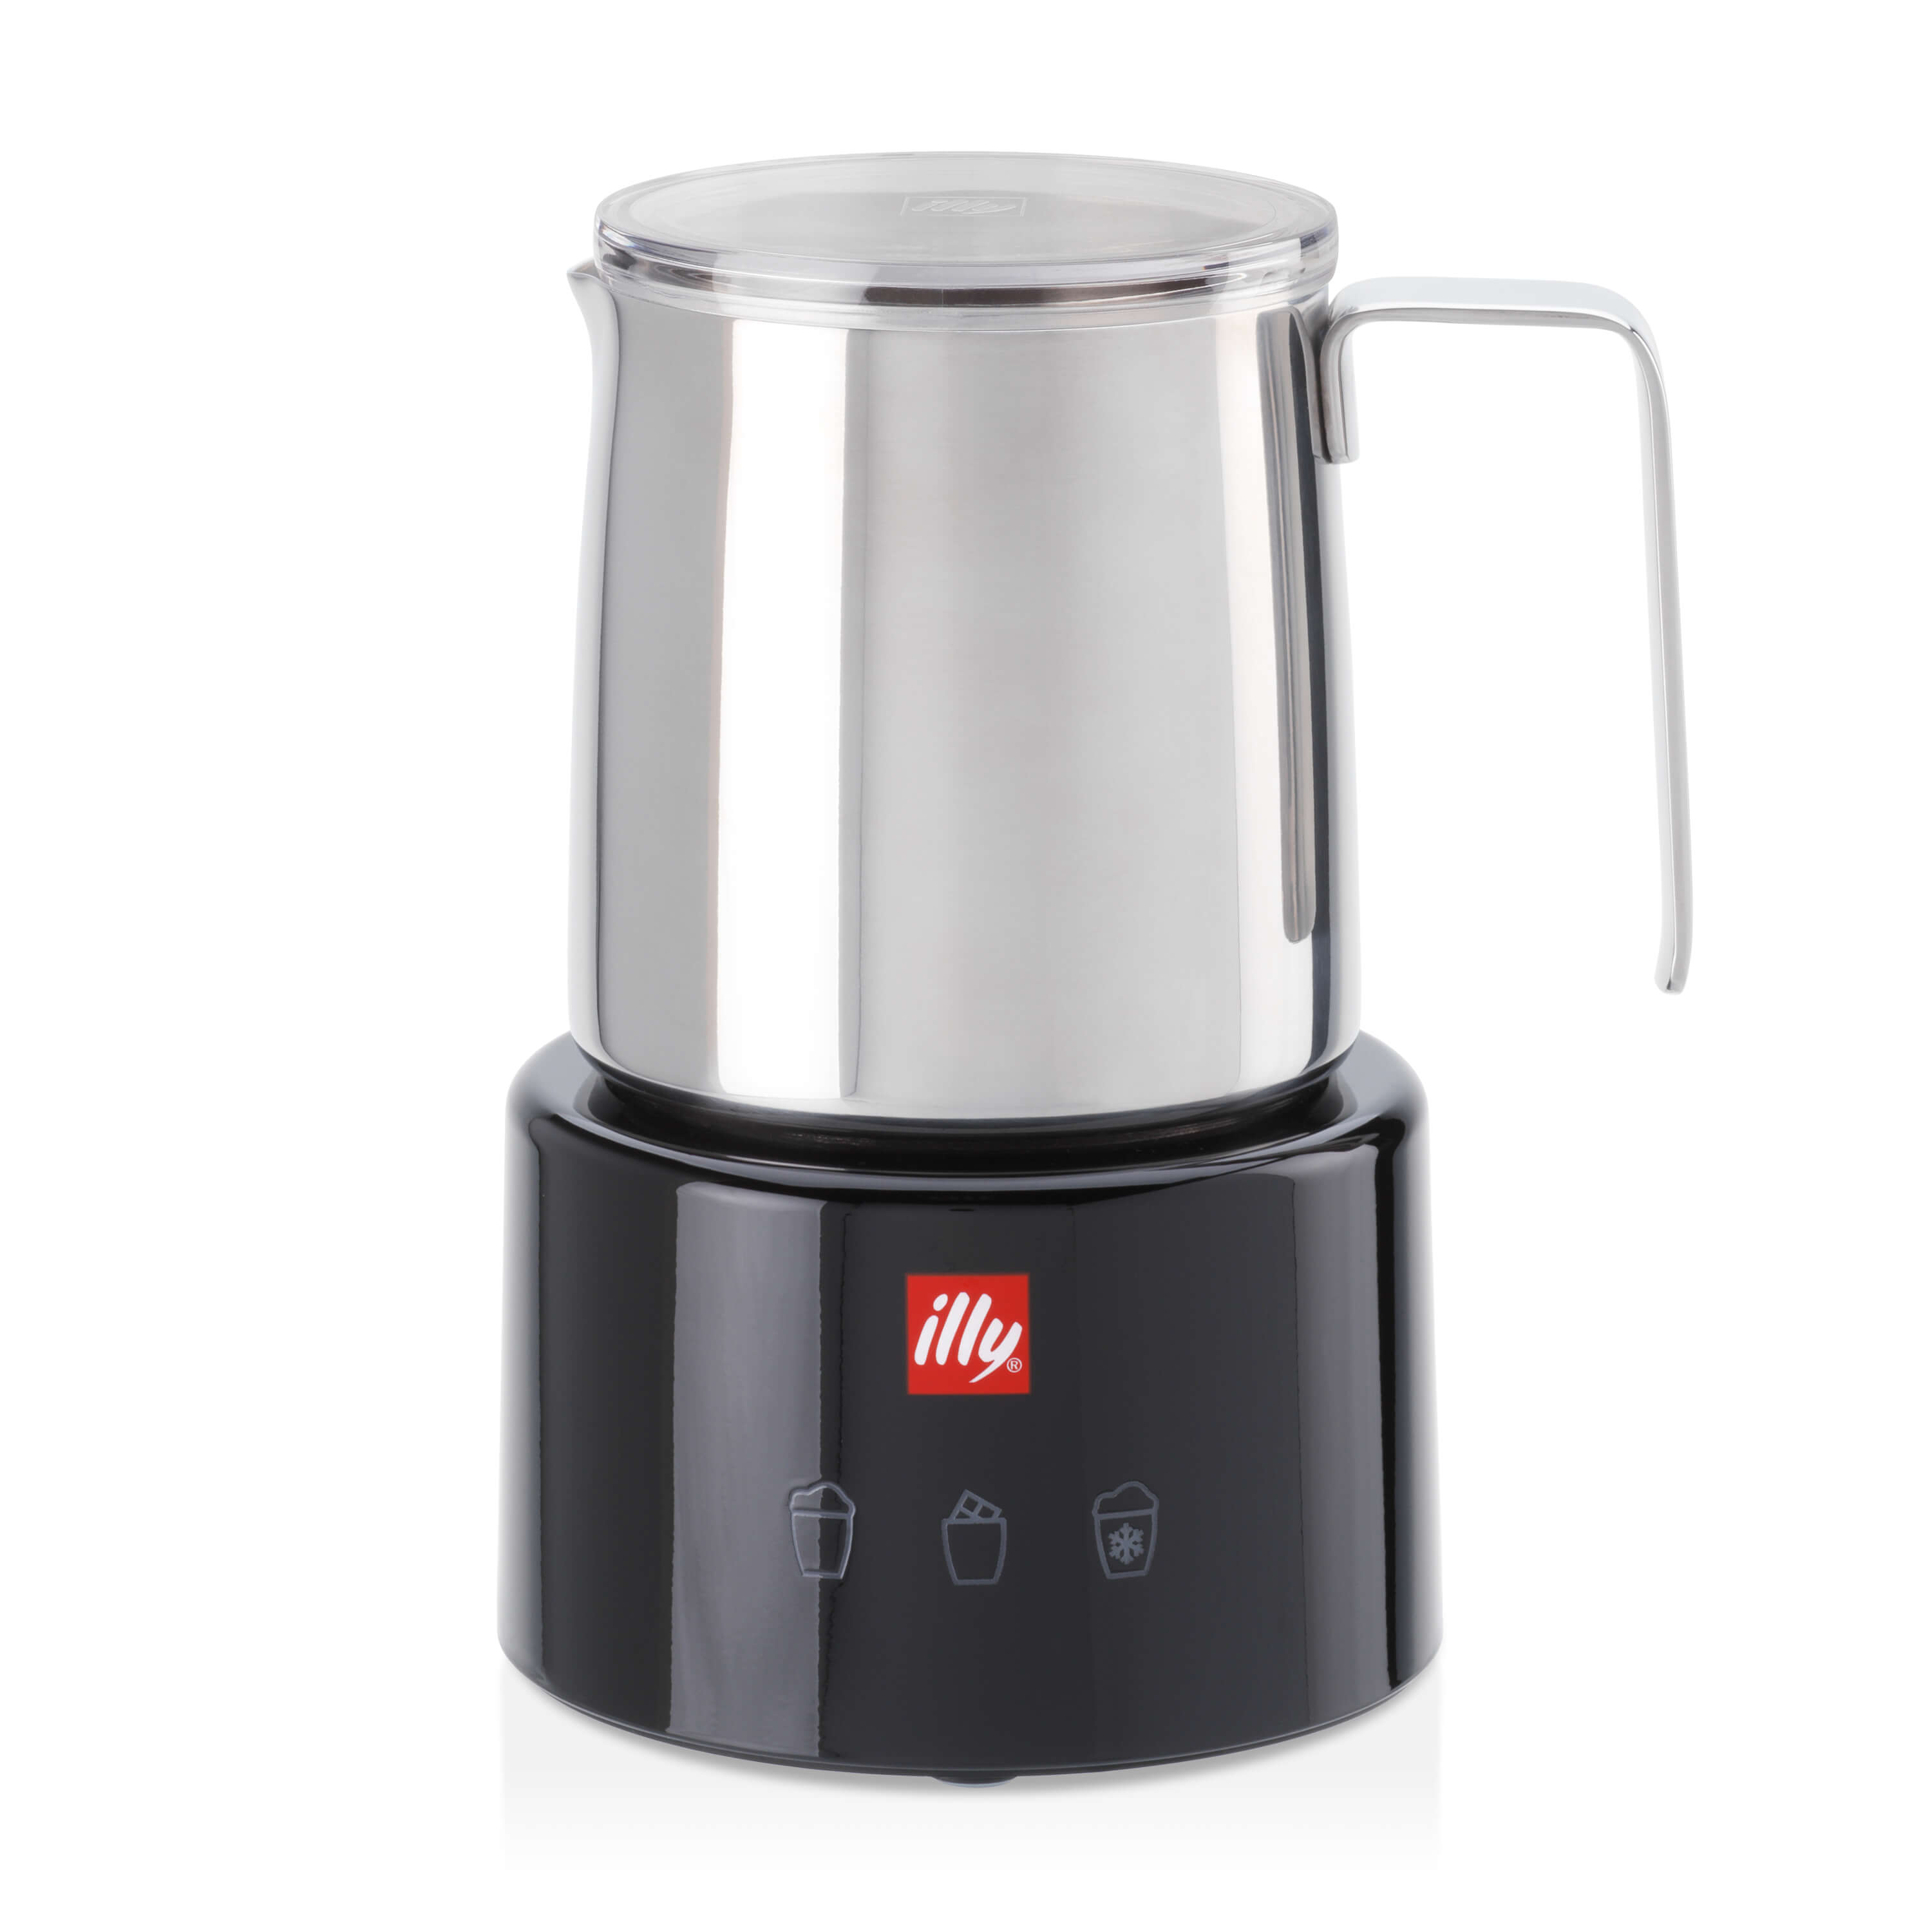 illy Electric Milk Frother Μαύρο, Αξεσουάρ Καφέ, 02-07-0103